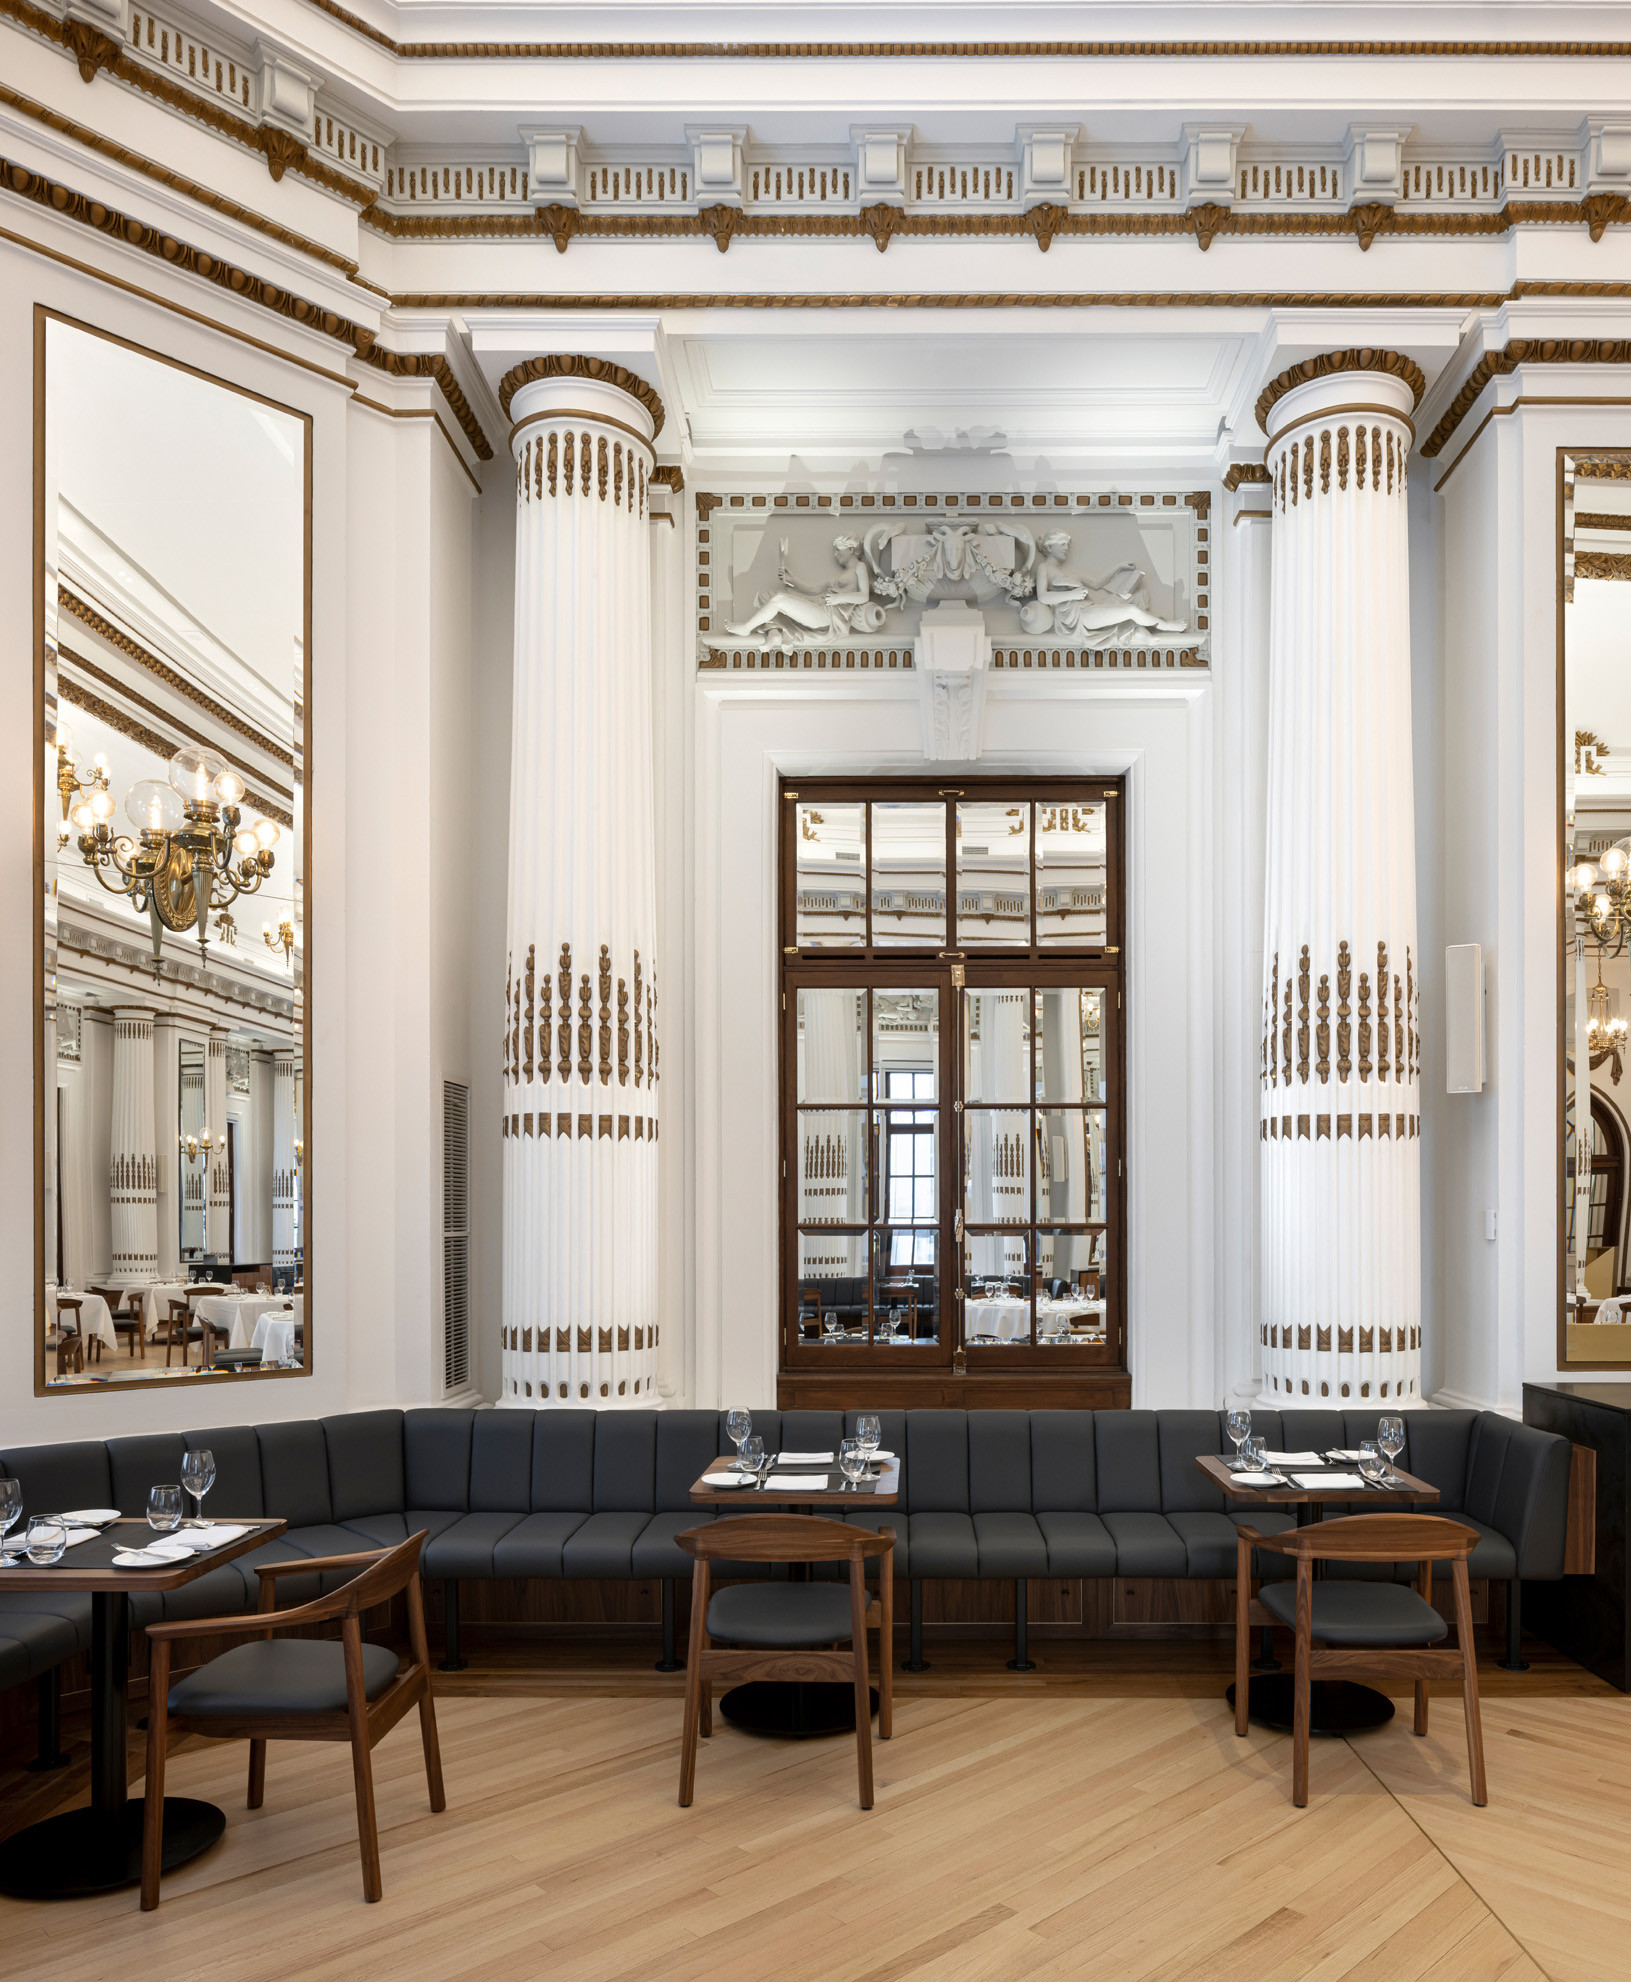 Imposing beaux arts style columns frame a mirrored window in Le Parlementaire restaurant